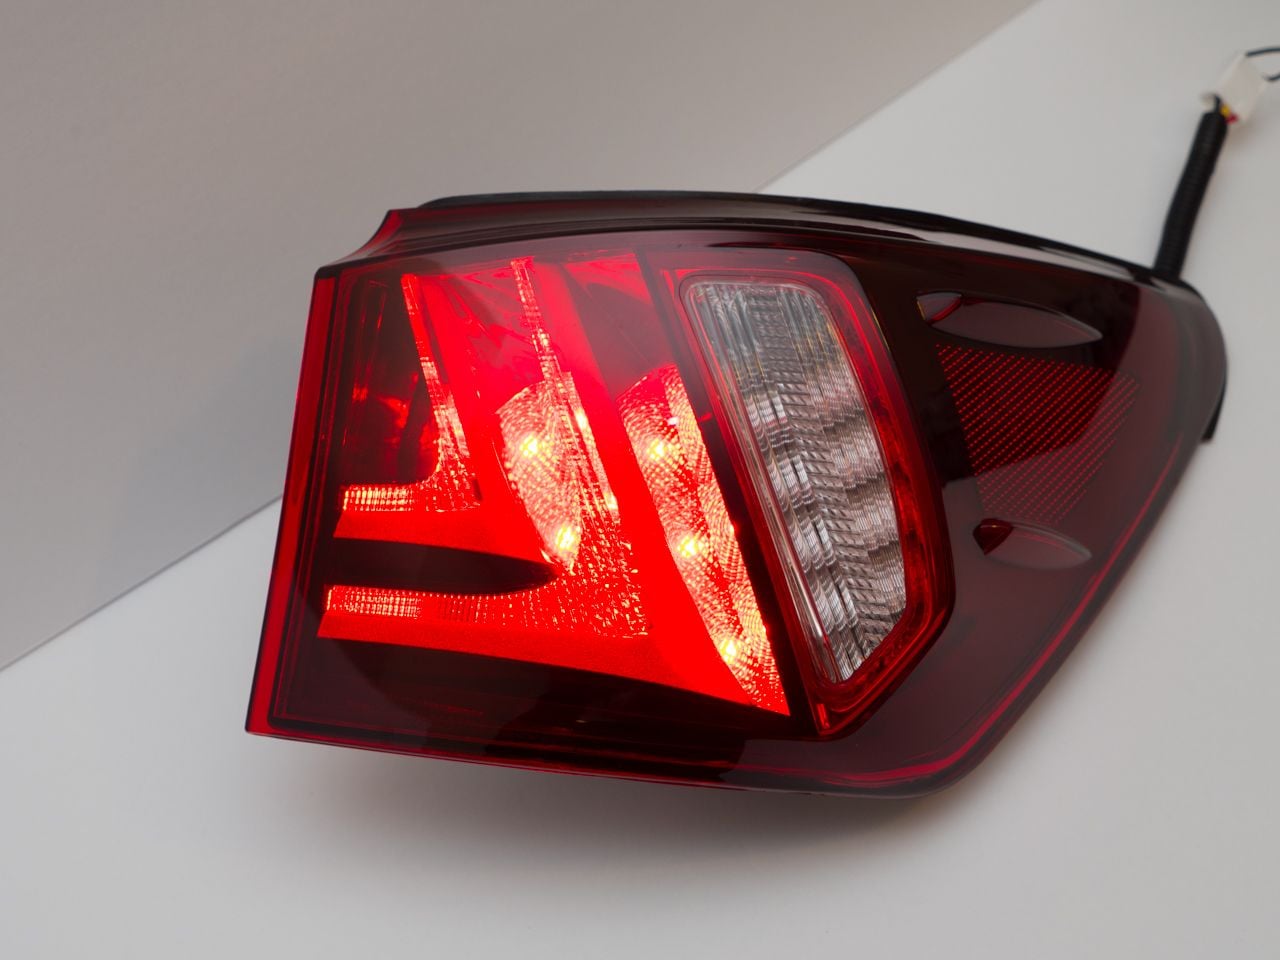 Lights - New VLAND Right Side Tail Light for 2IS - New - 2008 to 2014 Lexus IS F - 2006 to 2014 Lexus IS250 - 2006 to 2014 Lexus IS350 - San Jose, CA 95112, United States